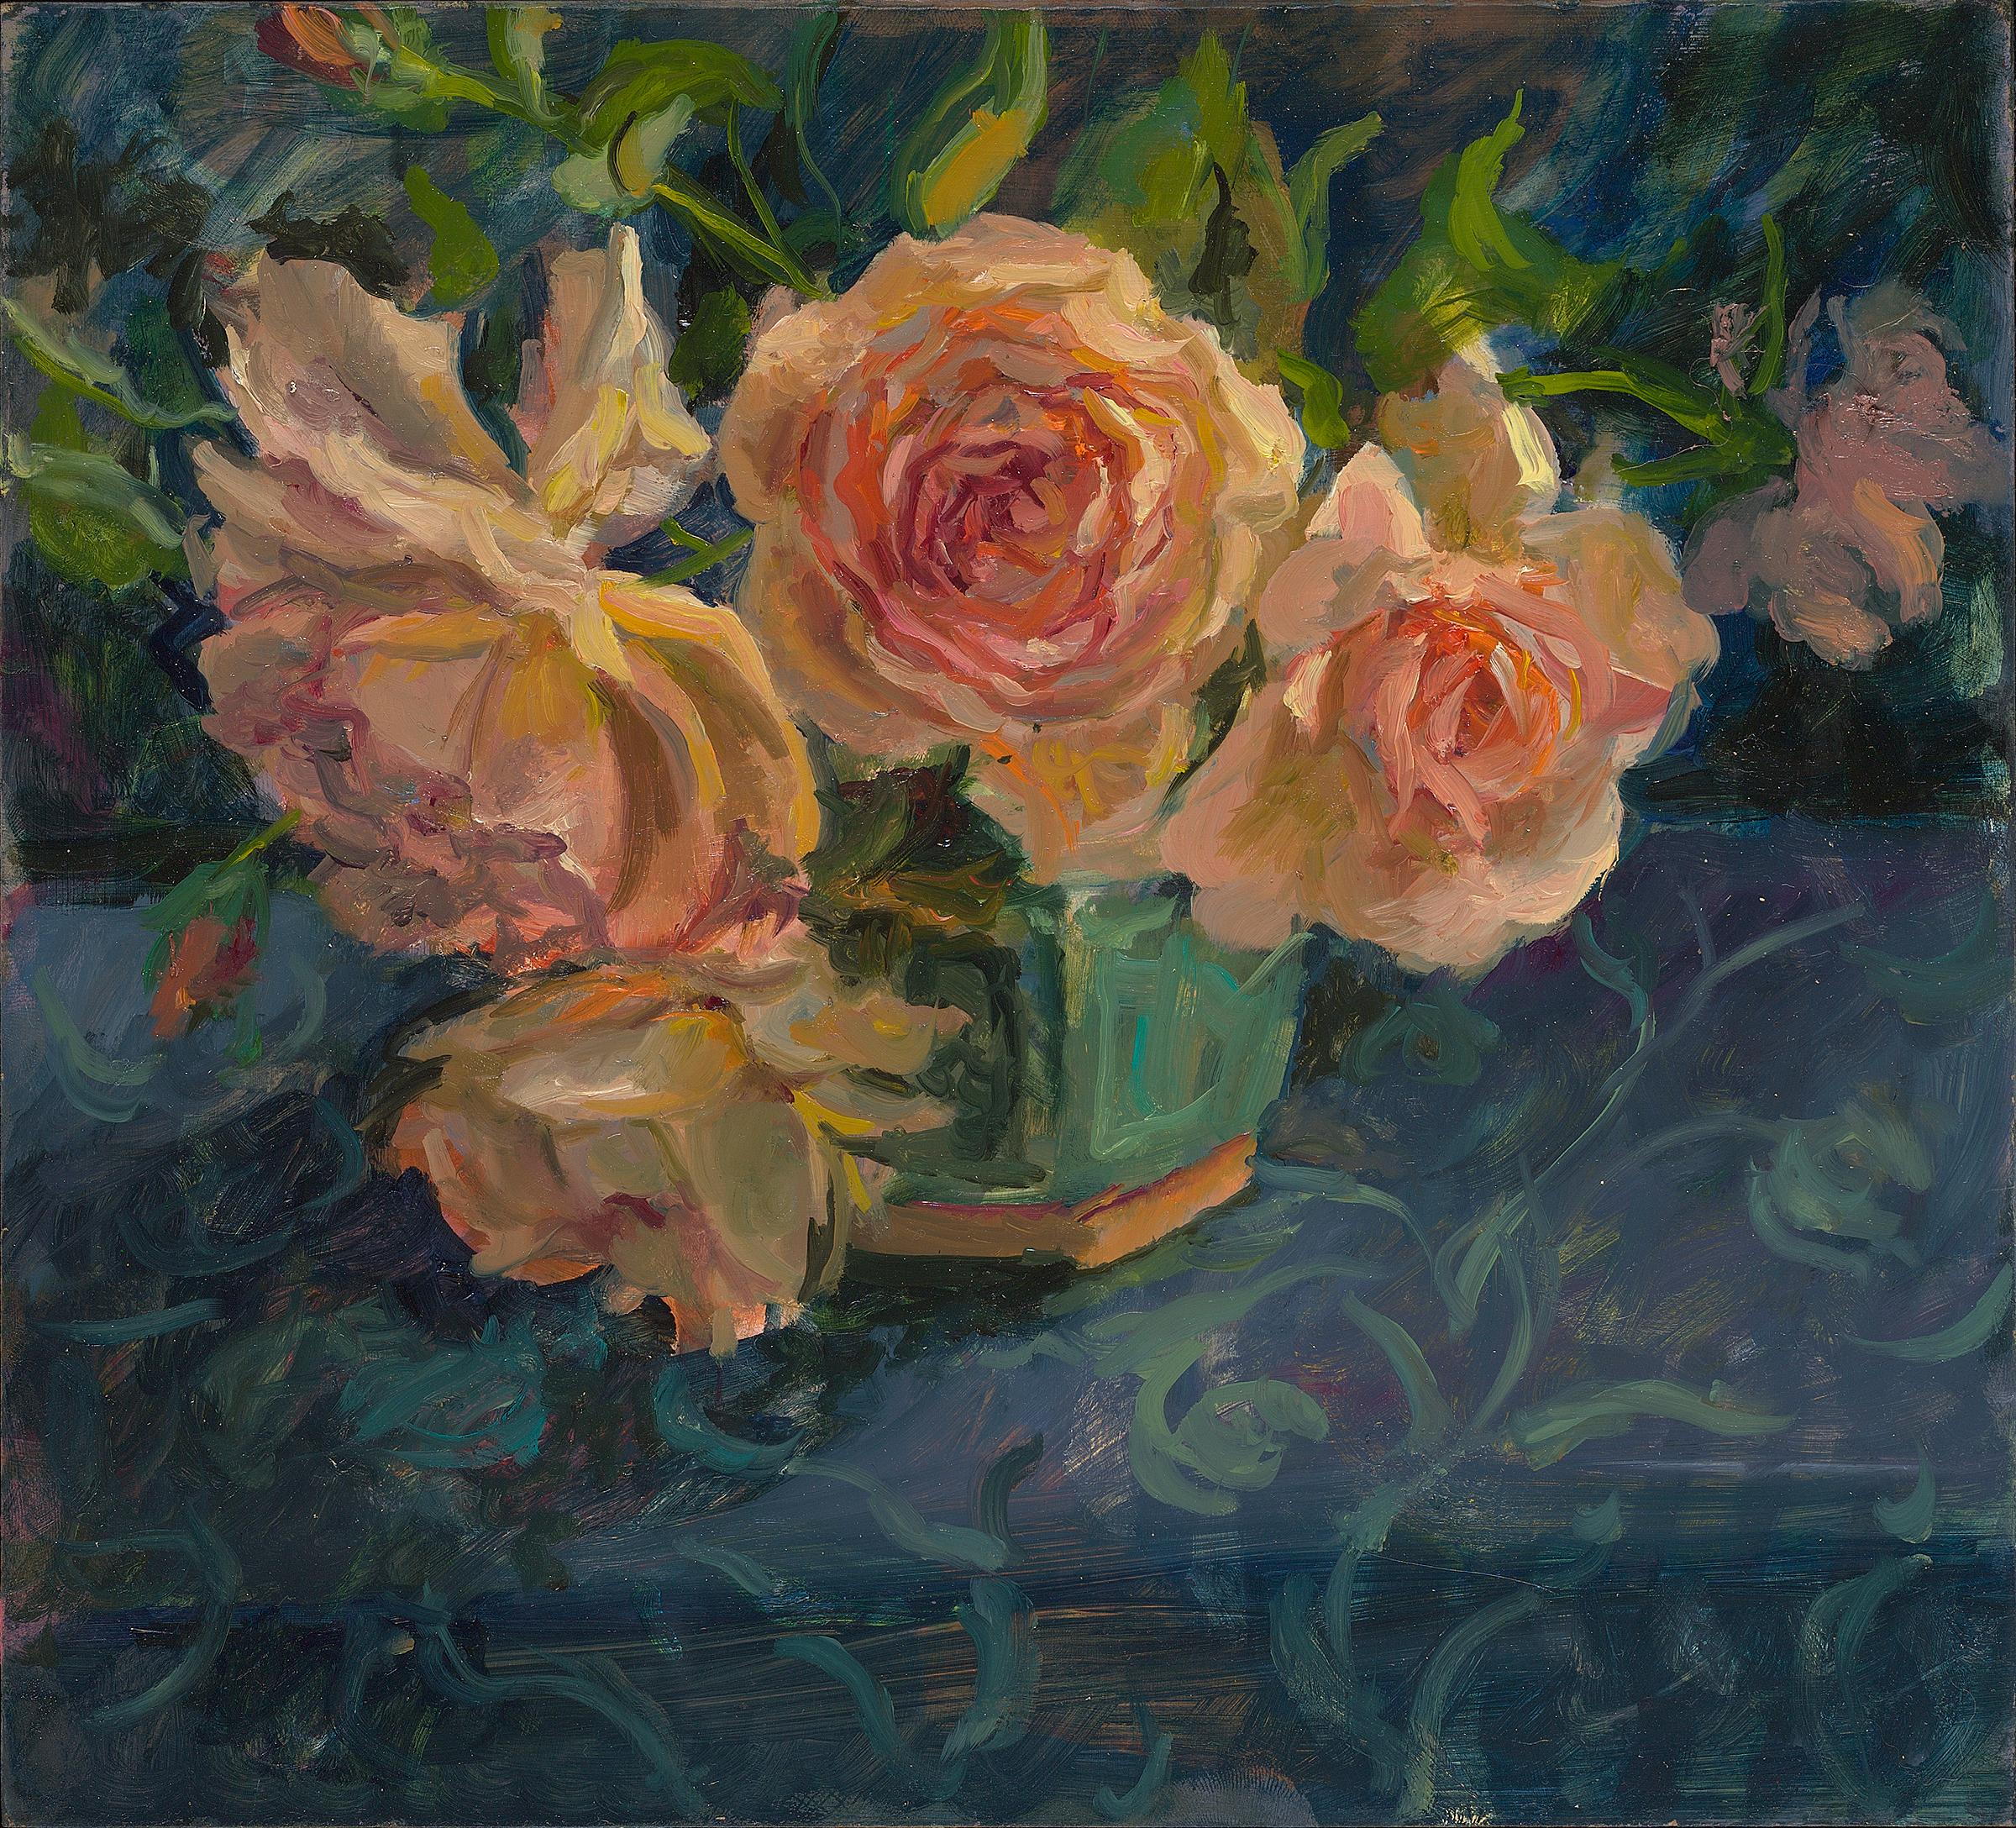 Keimpe van der Kooi Figurative Painting - Roses from my own garden- 21st Century Contemporary Dutch Still-life Painting 